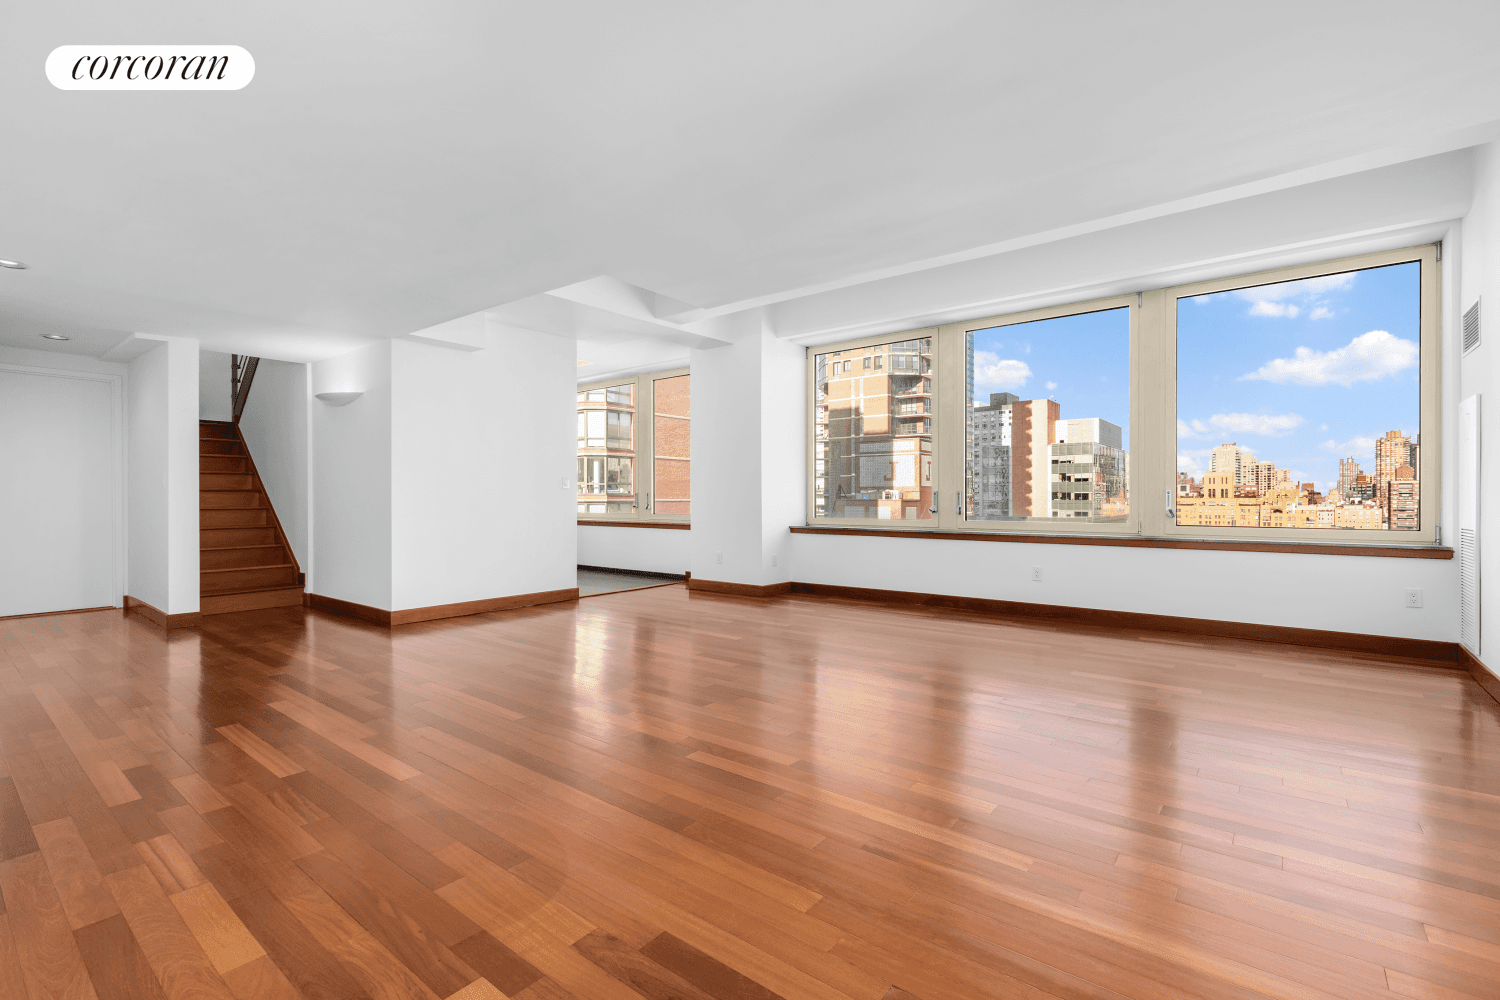 All of your wish list combined into one fabulous Penthouse overlooking the city and skyline views.